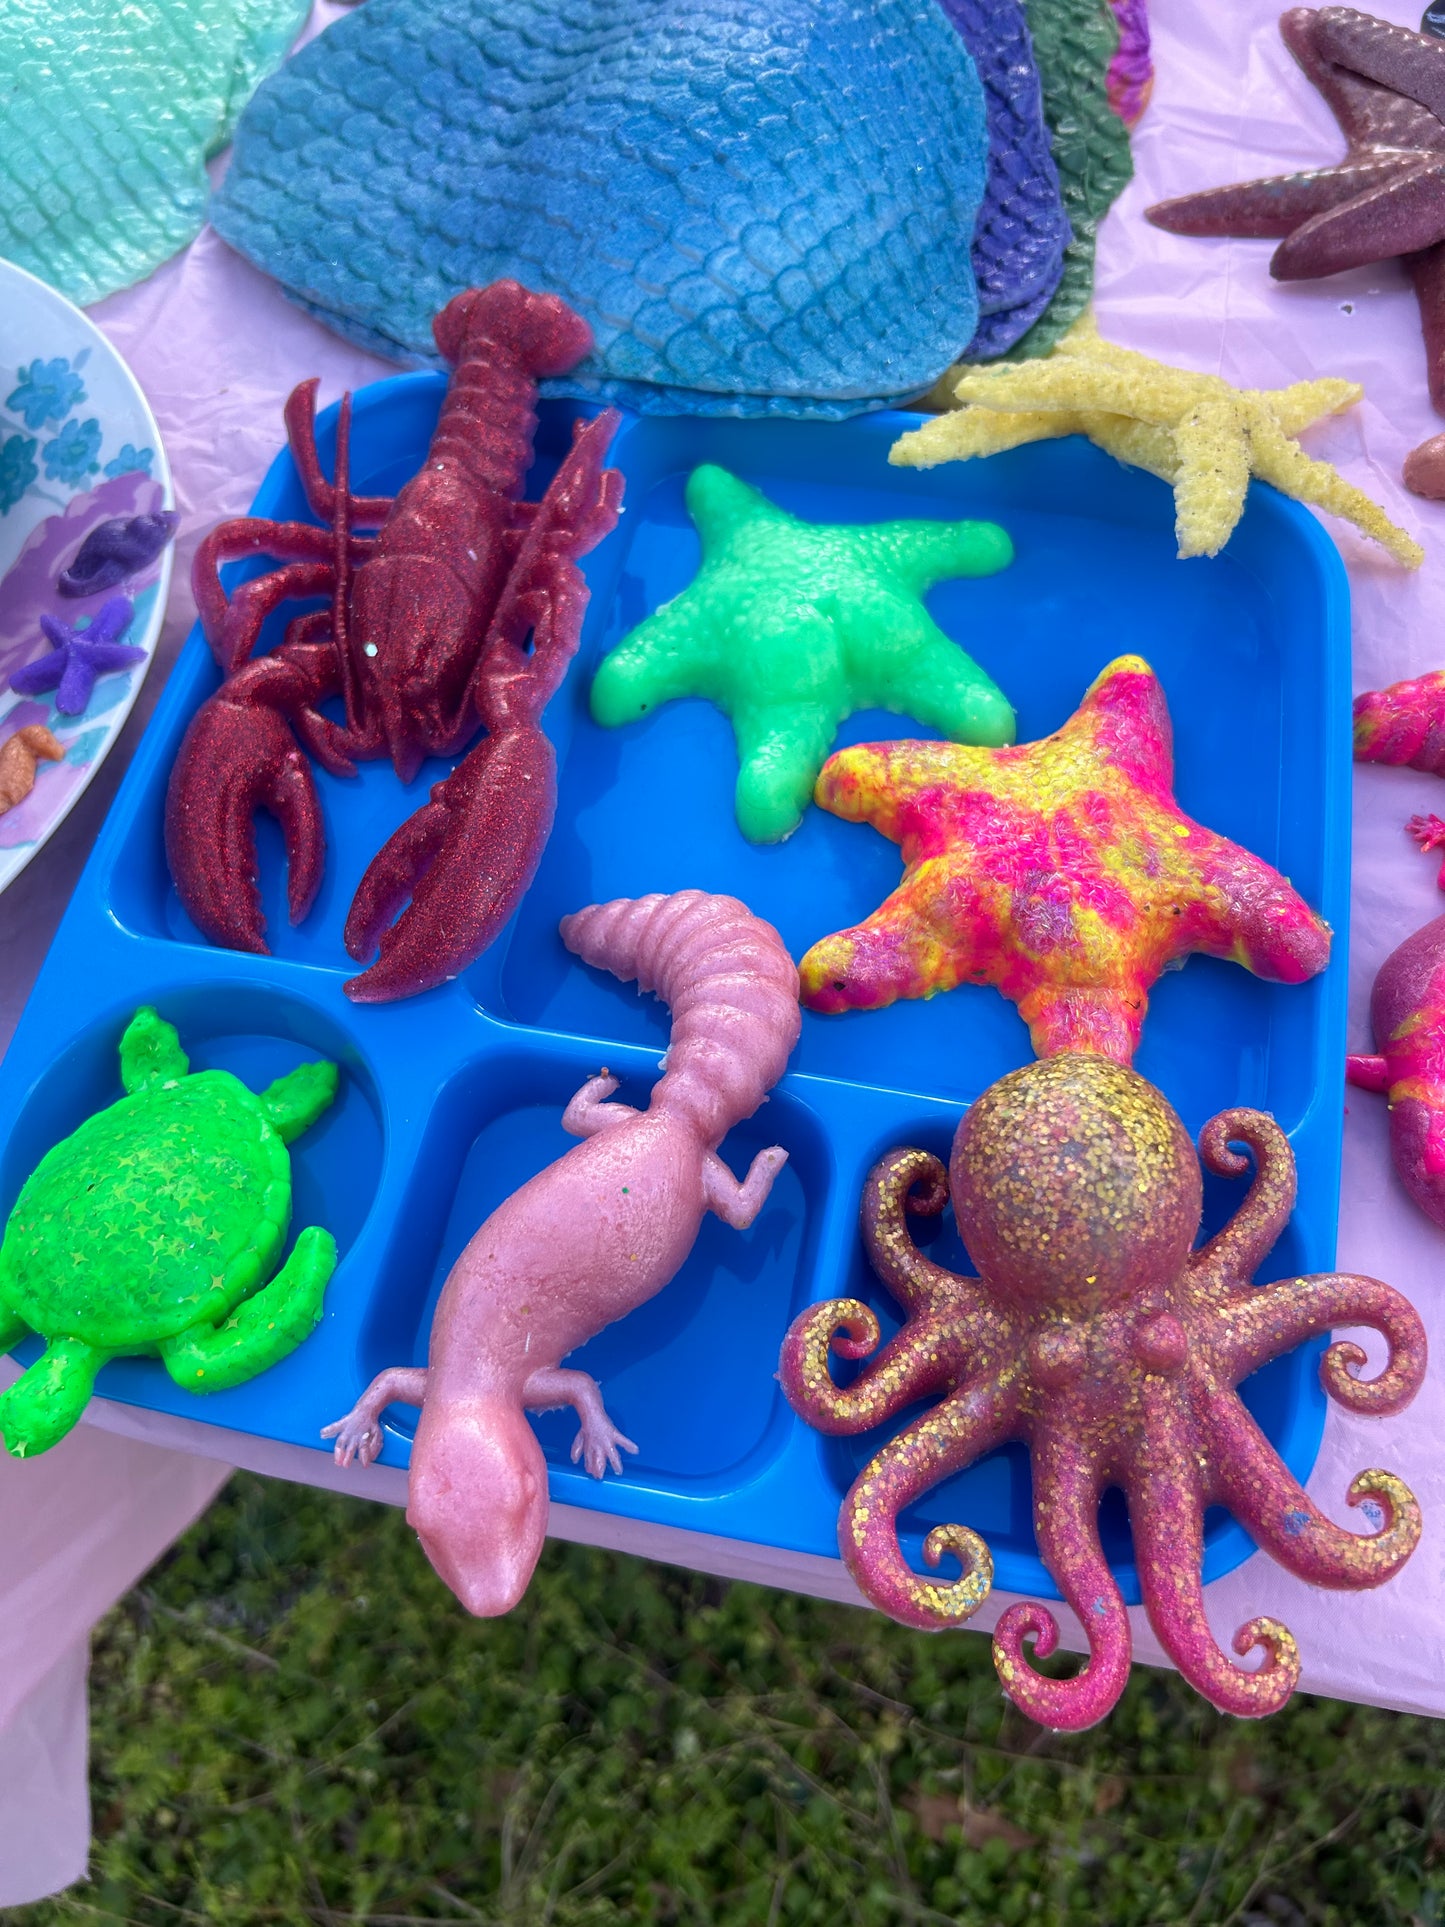 Octopus Silicone Squishy Toy